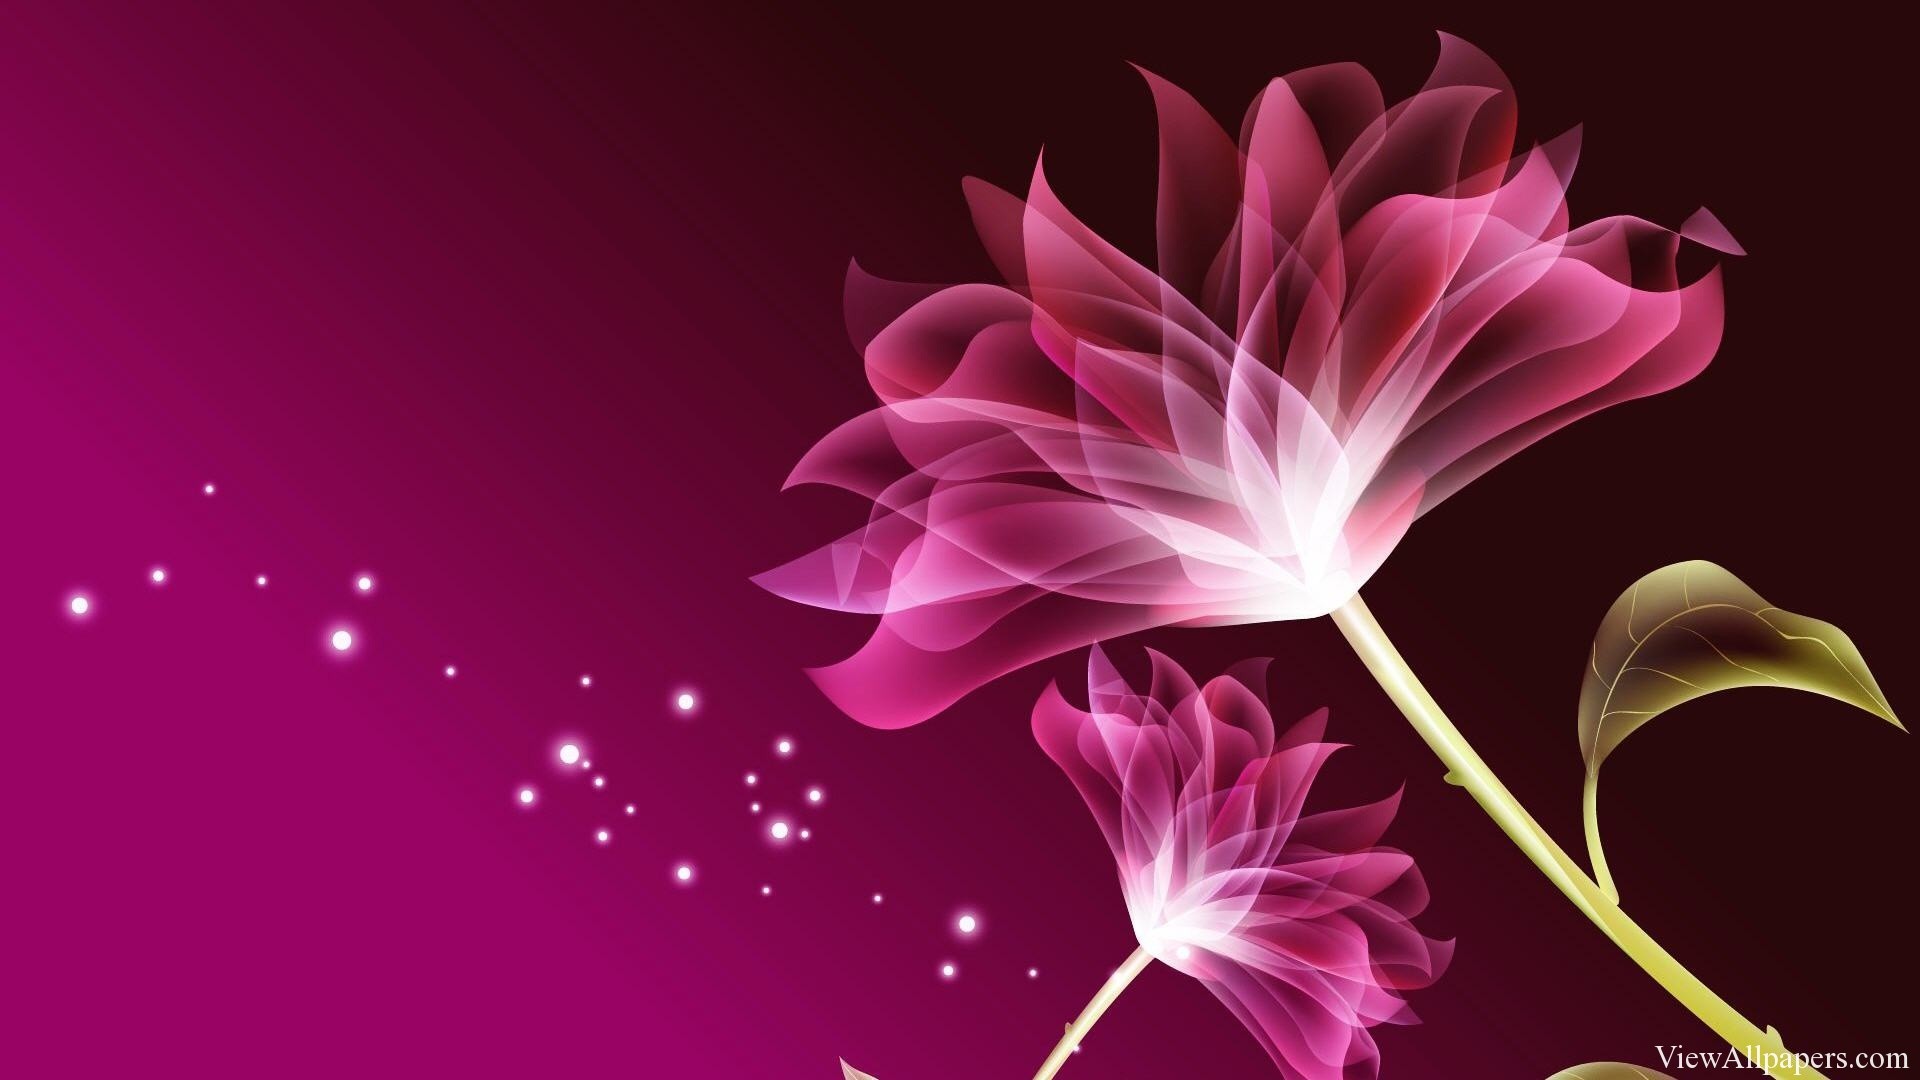 1920x1080 Beautiful Flowers Wallpapers Collection (4)